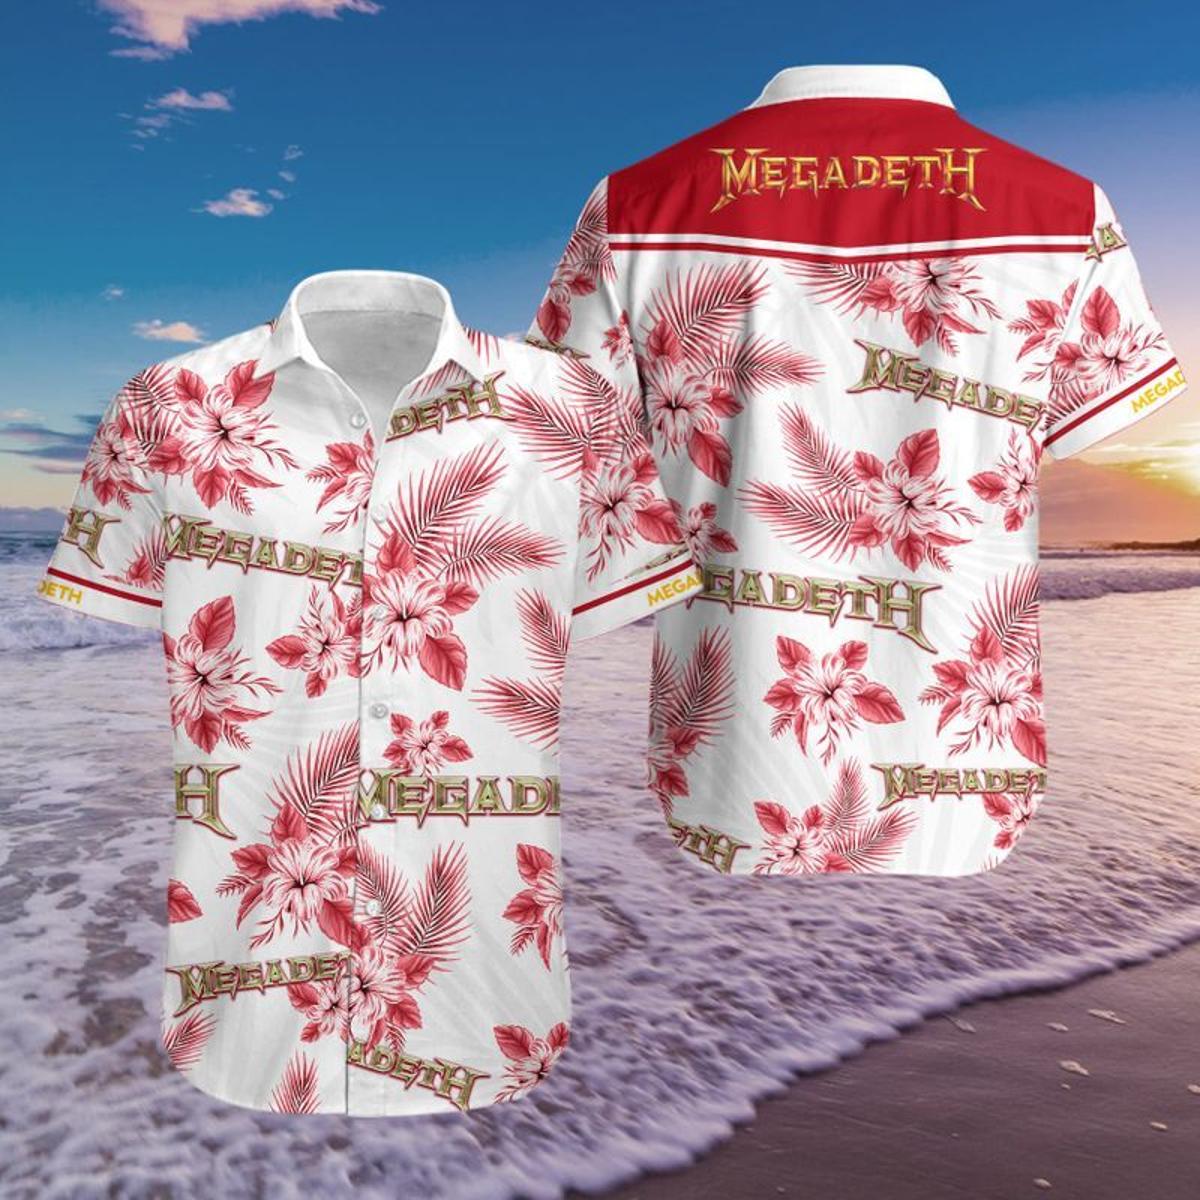 Freddie Mercury From Queen Rock Band Tropical Hawaiian Shirt Funny Gift For Fans